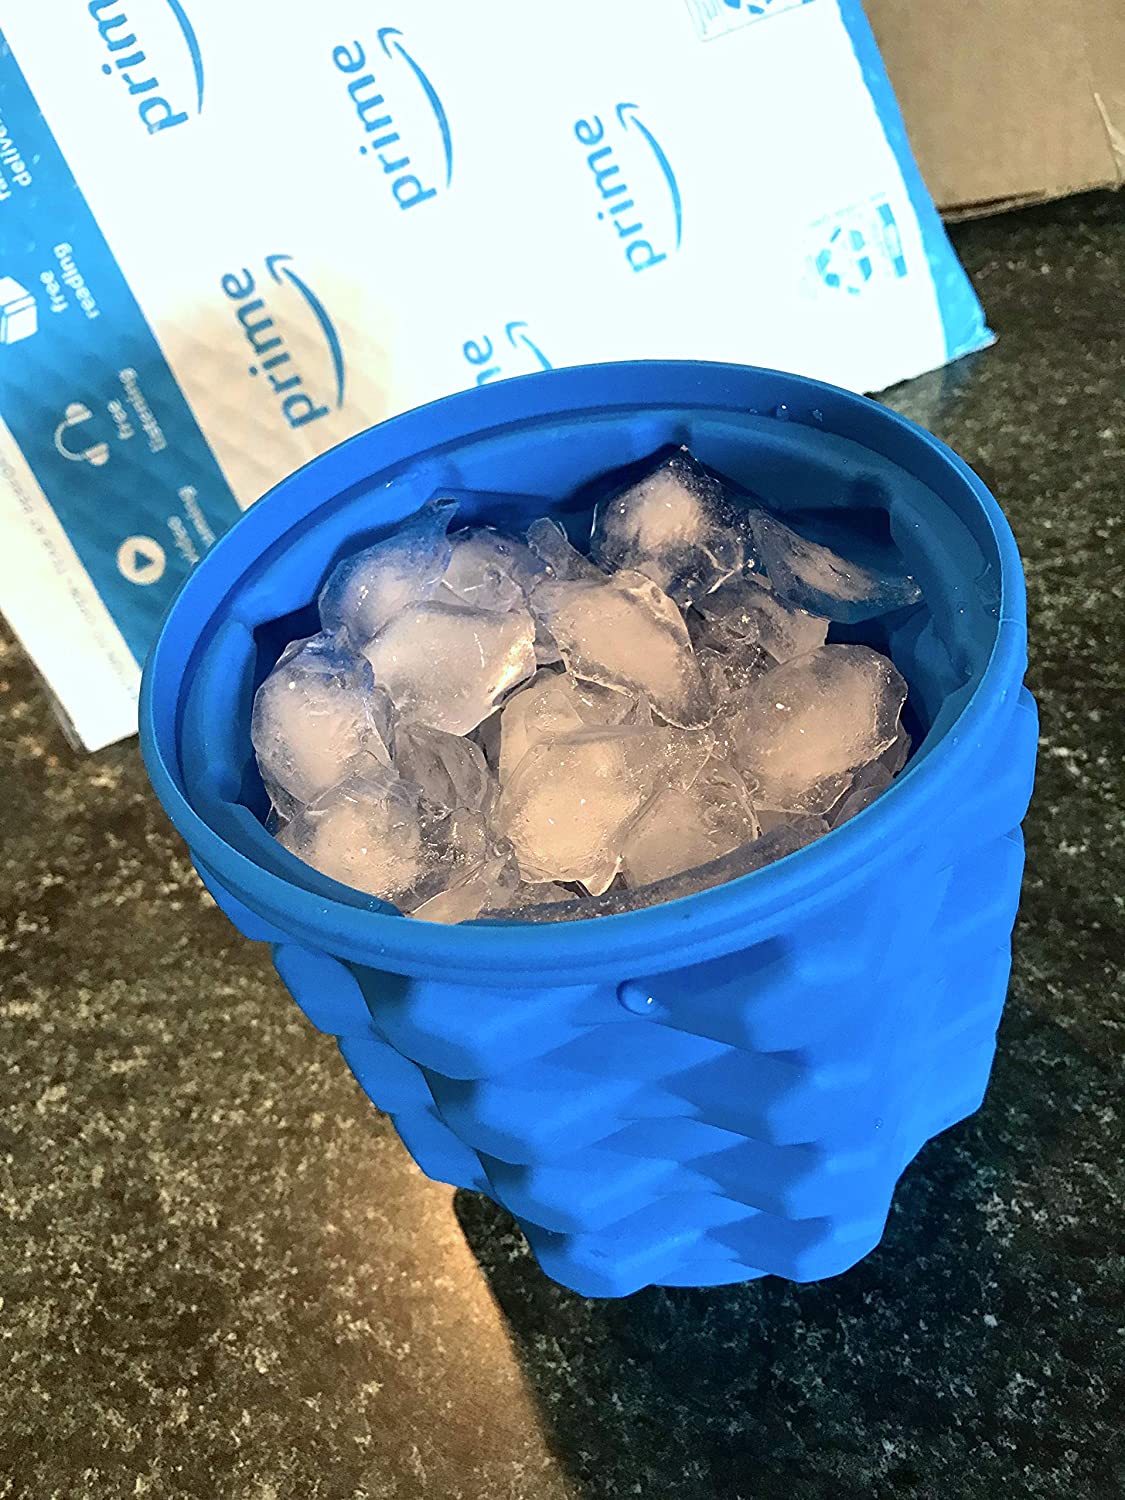 Mimapac The Ultimate Ice Cube Maker Silicone Bucket with Lid Makes Small-Size Nugget Ice Chips for Soft Drinks, Cocktail Ice, Wine on Ice, Crushed Ice